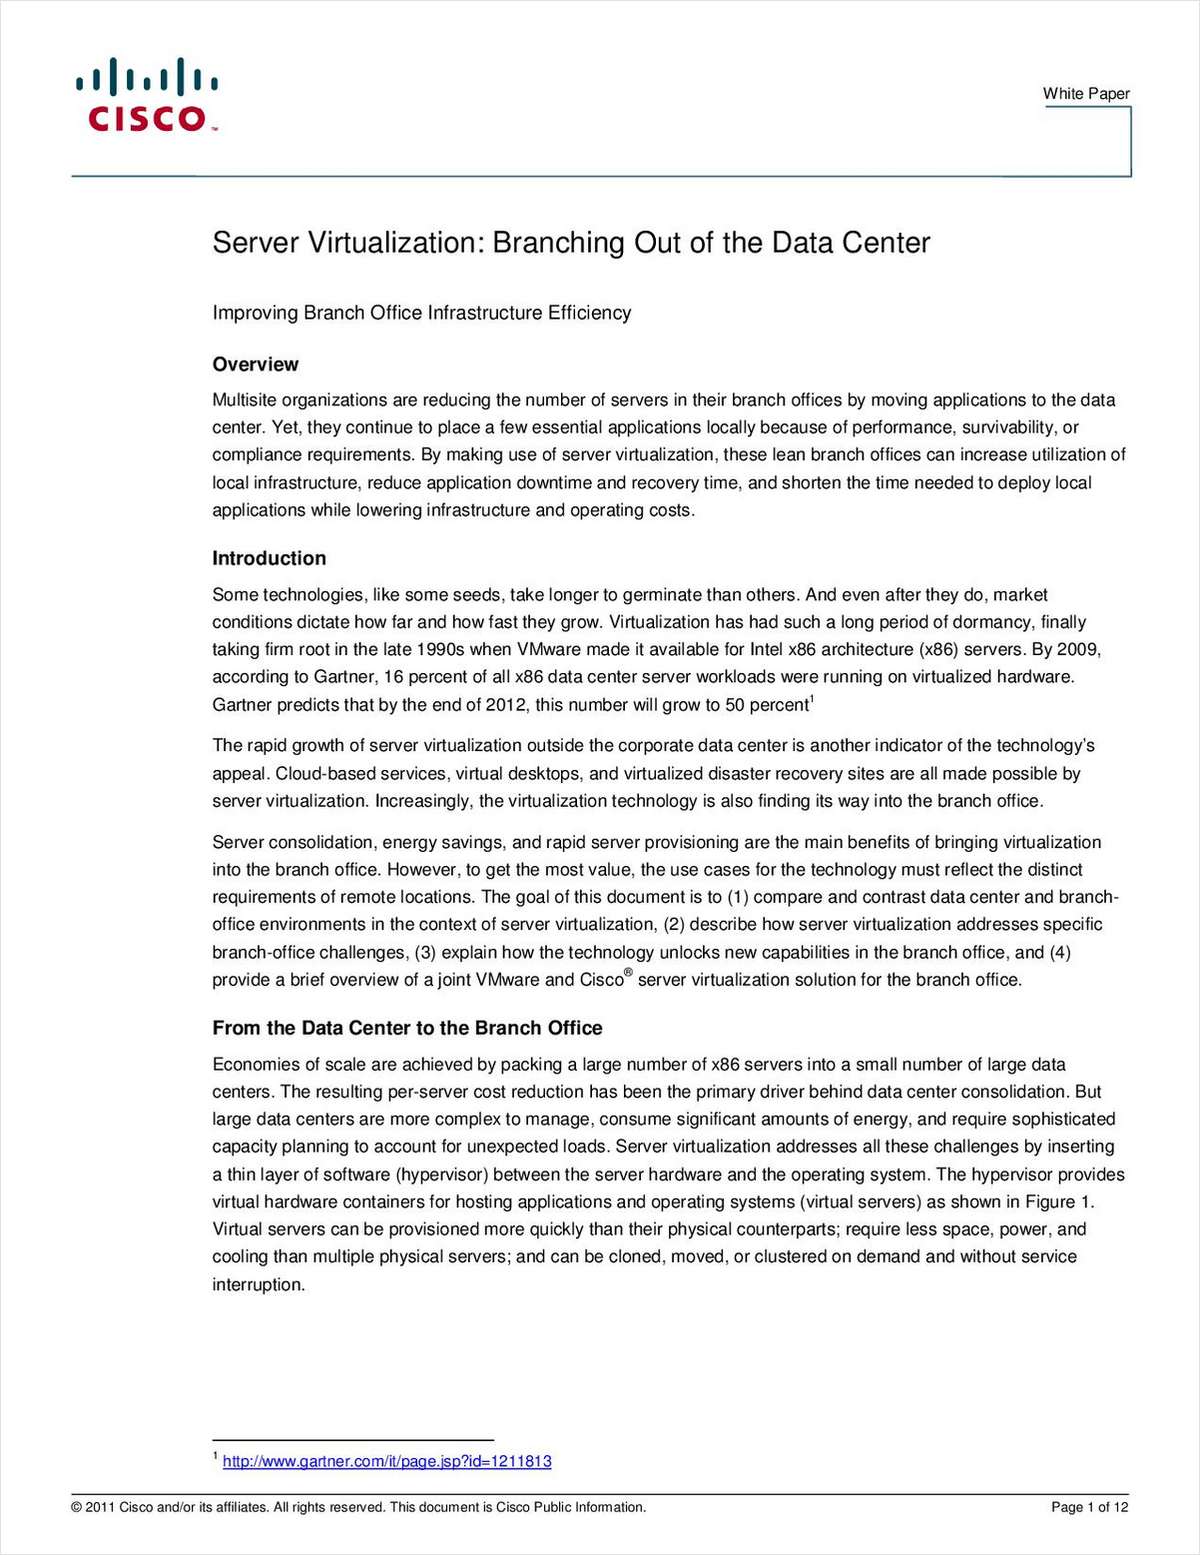 Server Virtualization: Branching Out of the Data Center